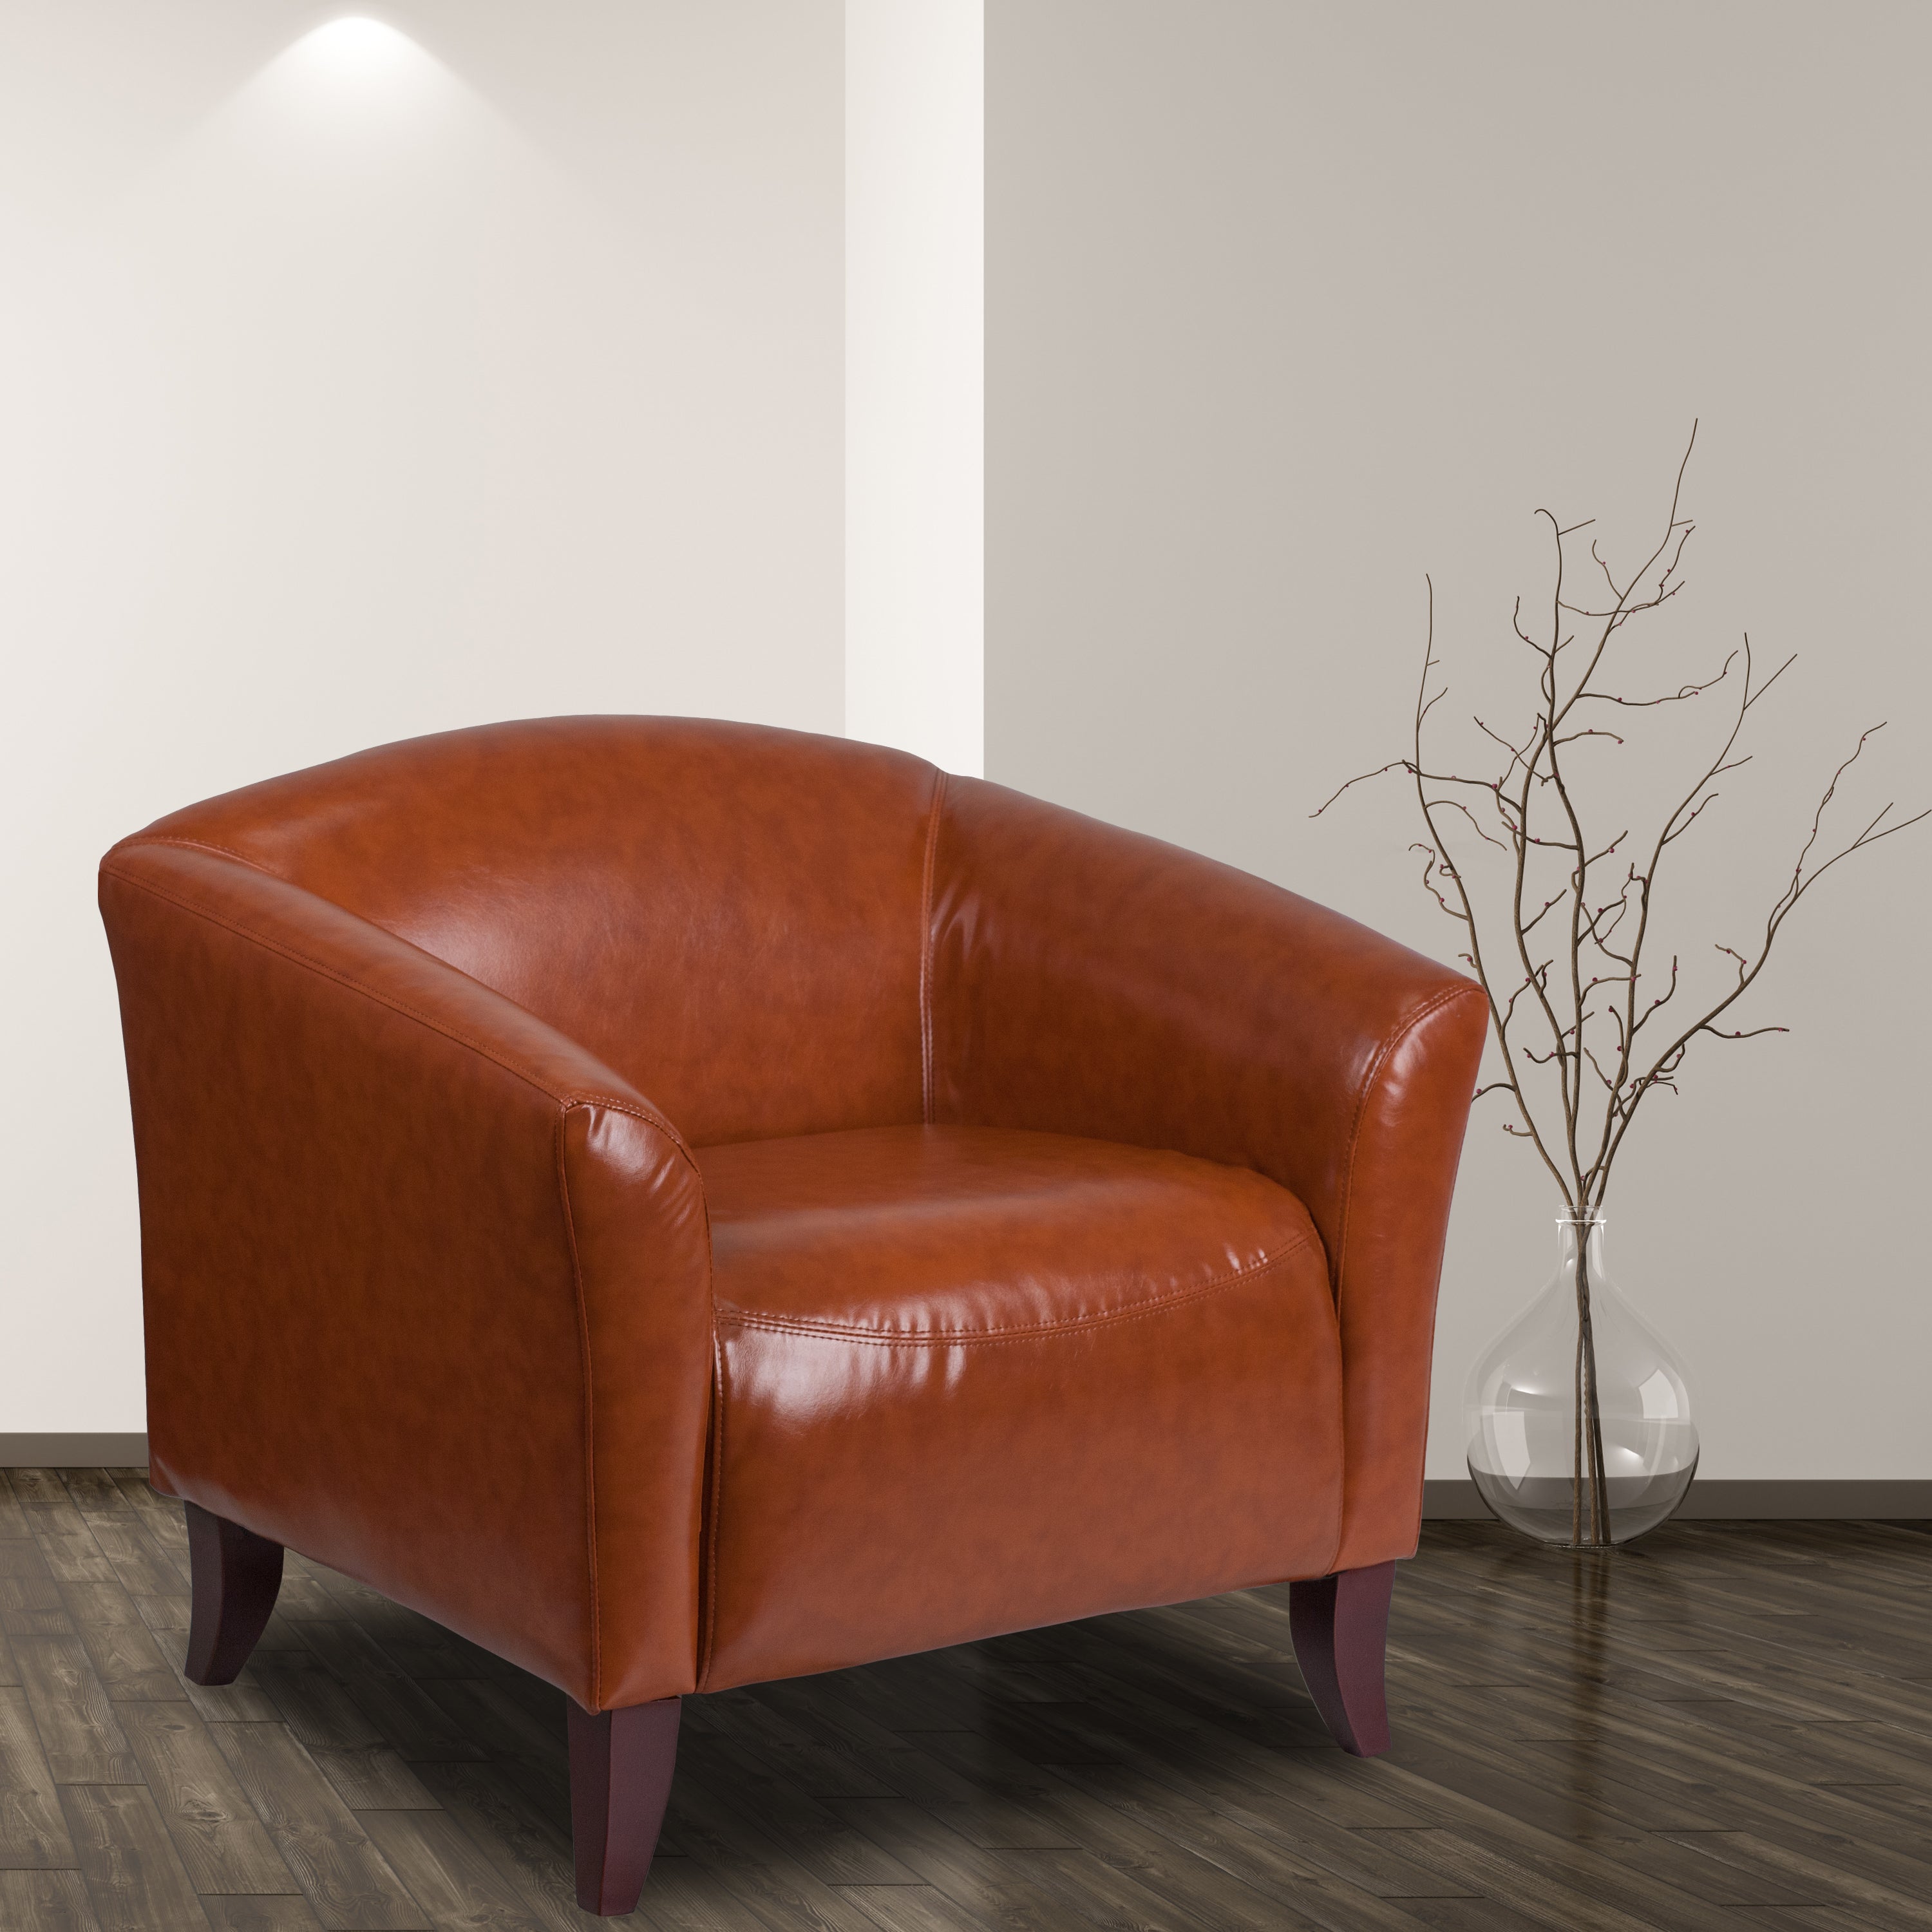 HERCULES Imperial Series LeatherSoft Chair with Cherry Wood Feet-Reception Chair-Flash Furniture-Wall2Wall Furnishings